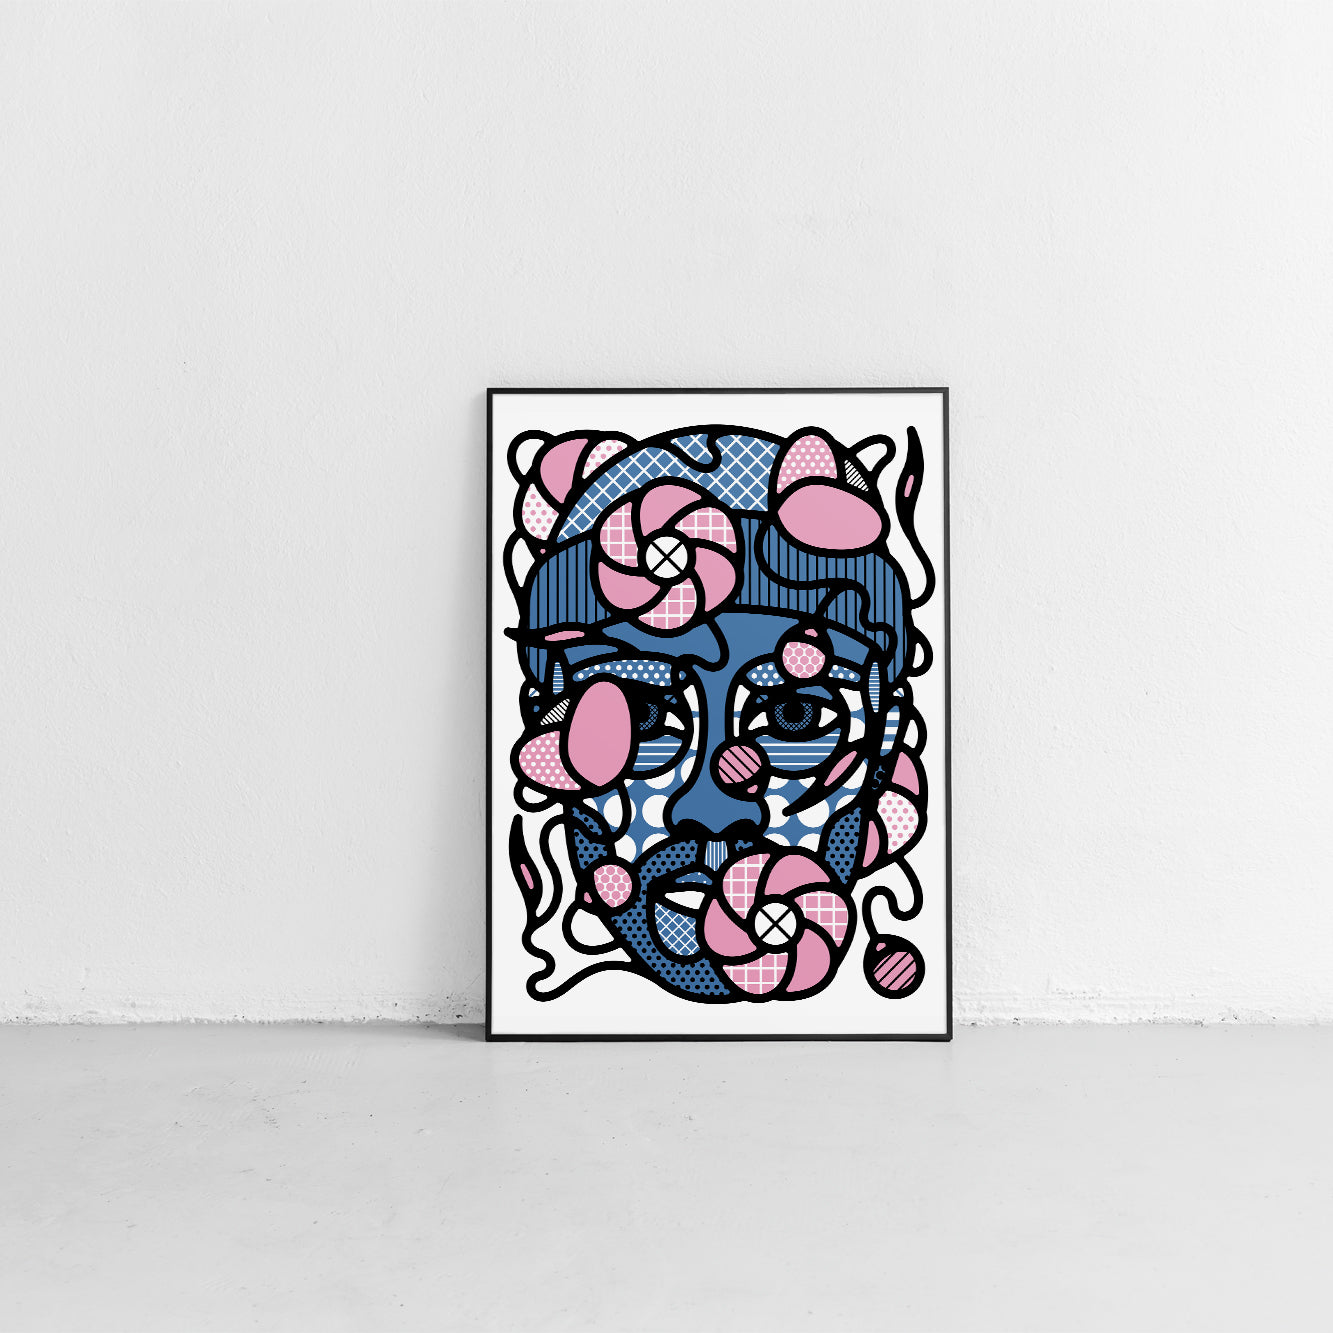 Untitled - Art Print by Craig & Karl | Another Fine Mess